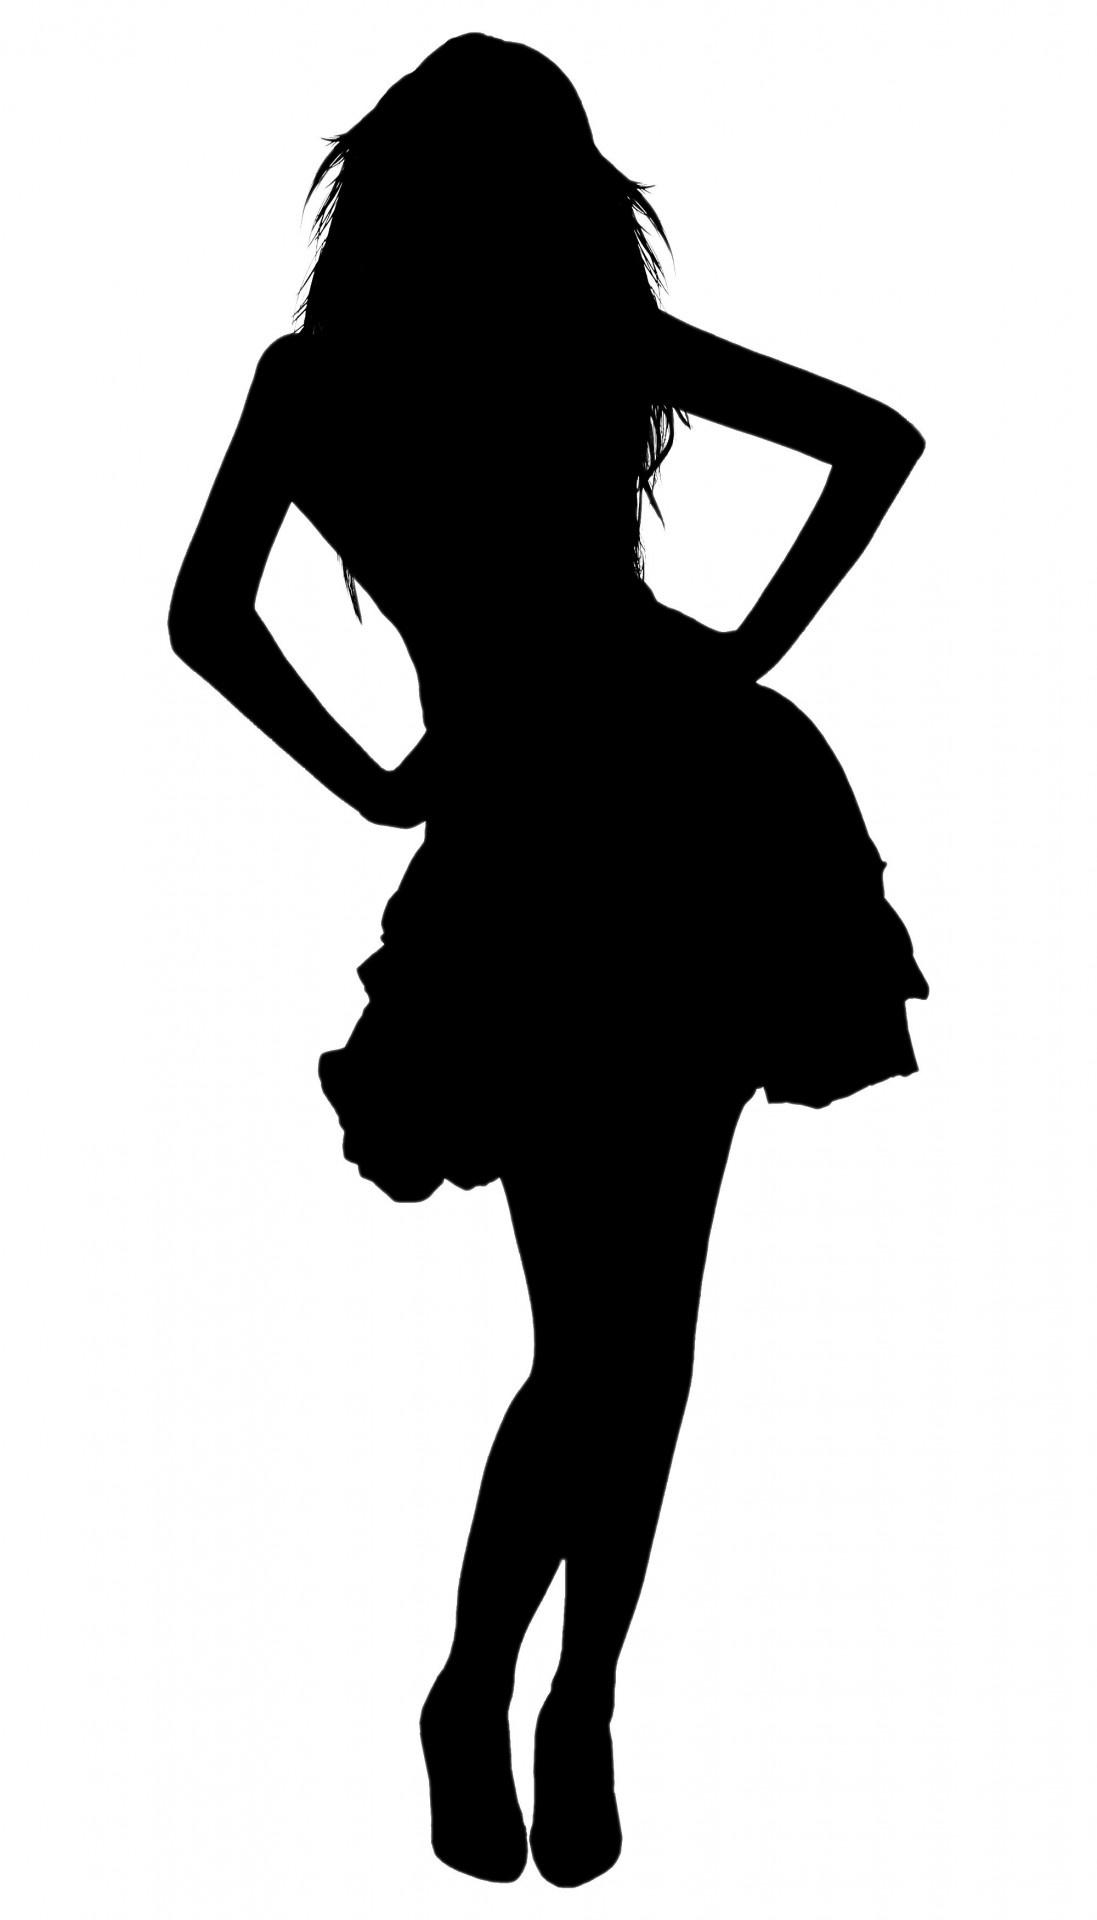 Silhouette Woman 2 Free Stock Photo - Public Domain Pictures